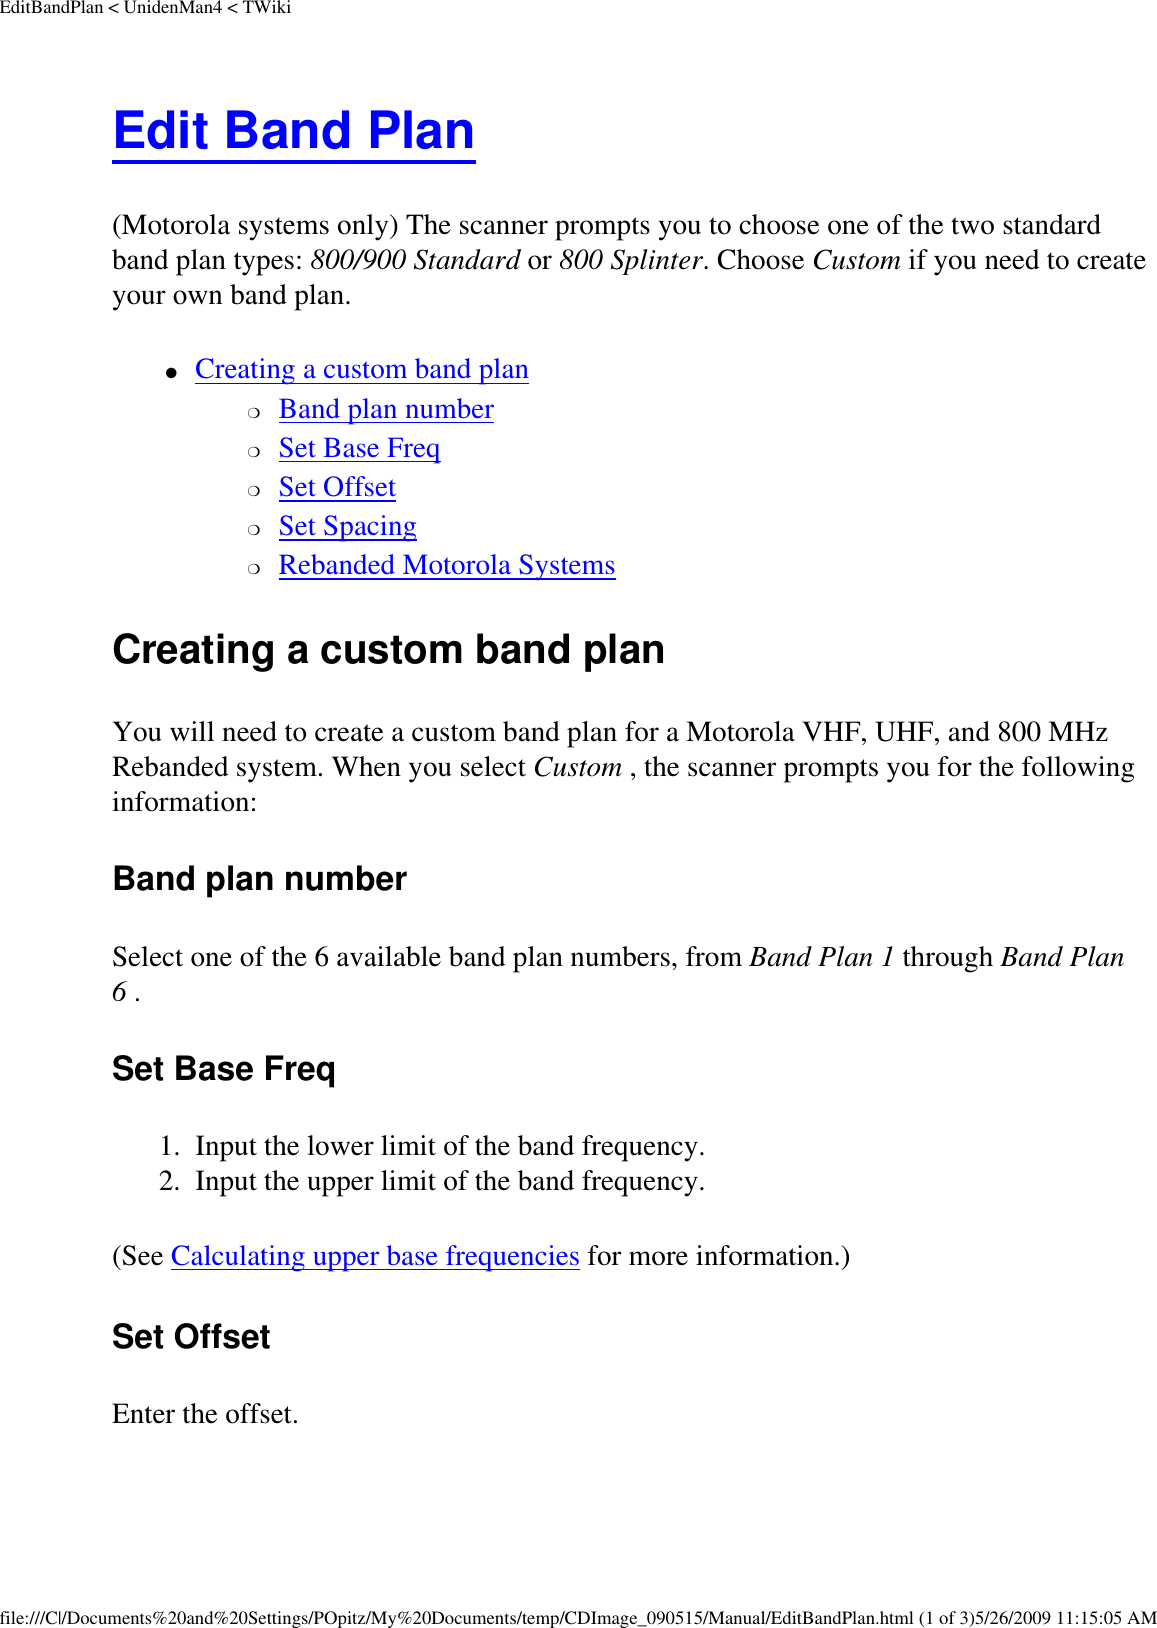 EditBandPlan &lt; UnidenMan4 &lt; TWikiEdit Band Plan (Motorola systems only) The scanner prompts you to choose one of the two standard band plan types: 800/900 Standard or 800 Splinter. Choose Custom if you need to create your own band plan. ●     Creating a custom band plan ❍     Band plan number ❍     Set Base Freq ❍     Set Offset ❍     Set Spacing ❍     Rebanded Motorola Systems Creating a custom band plan You will need to create a custom band plan for a Motorola VHF, UHF, and 800 MHz Rebanded system. When you select Custom , the scanner prompts you for the following information: Band plan number Select one of the 6 available band plan numbers, from Band Plan 1 through Band Plan 6 . Set Base Freq 1.  Input the lower limit of the band frequency. 2.  Input the upper limit of the band frequency. (See Calculating upper base frequencies for more information.) Set Offset Enter the offset. file:///C|/Documents%20and%20Settings/POpitz/My%20Documents/temp/CDImage_090515/Manual/EditBandPlan.html (1 of 3)5/26/2009 11:15:05 AM